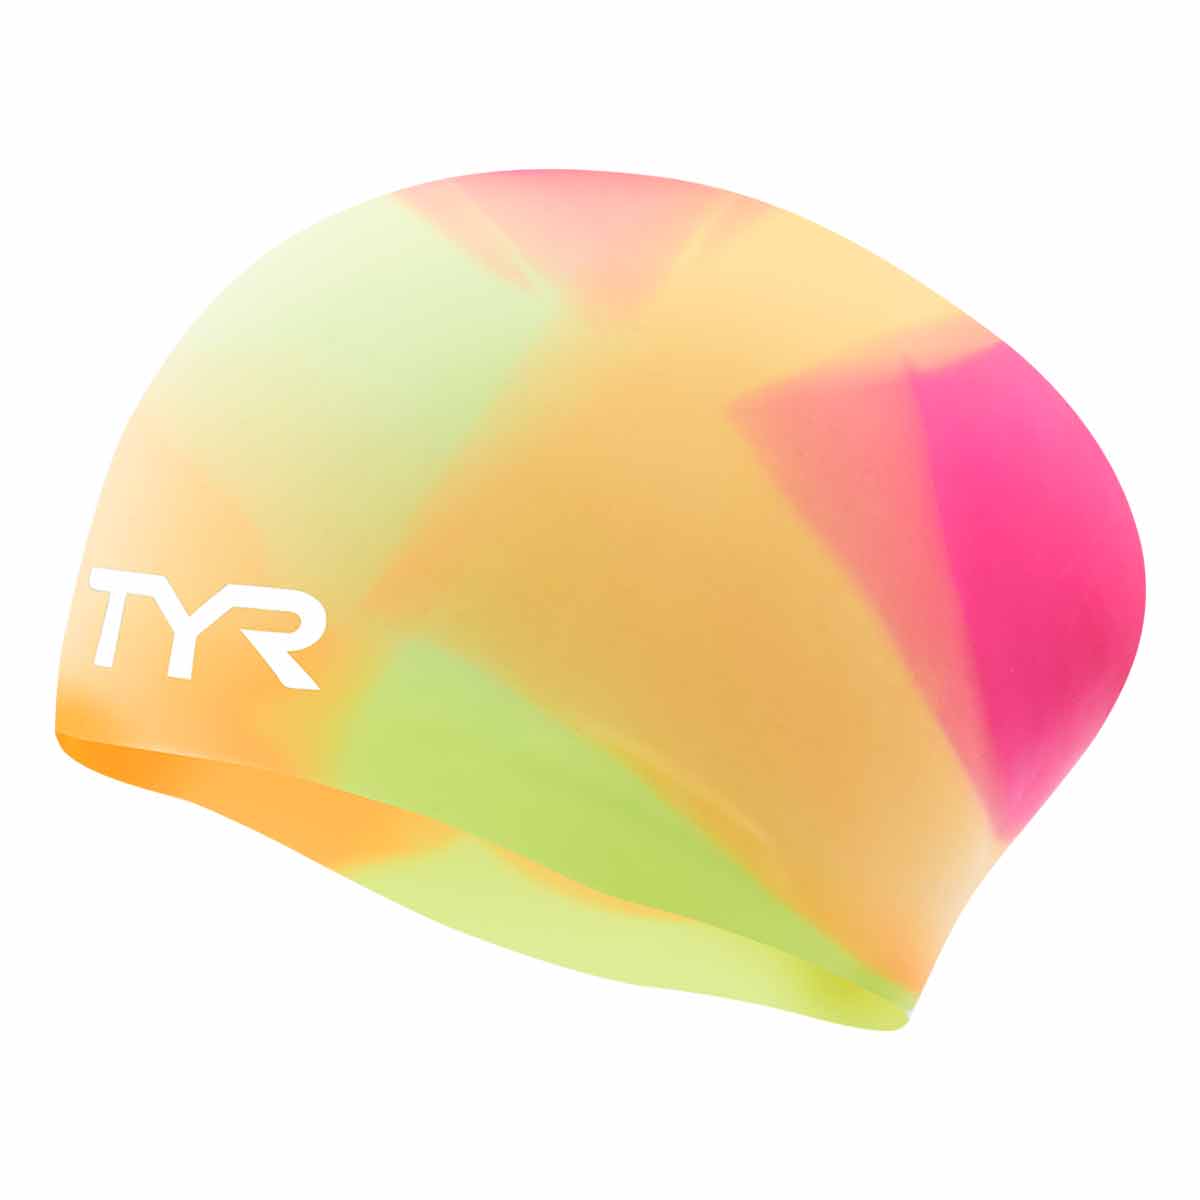 TYR Tie Dye Youth Long Haired Silicone Swim Cap - Pink/Yellow/Orange